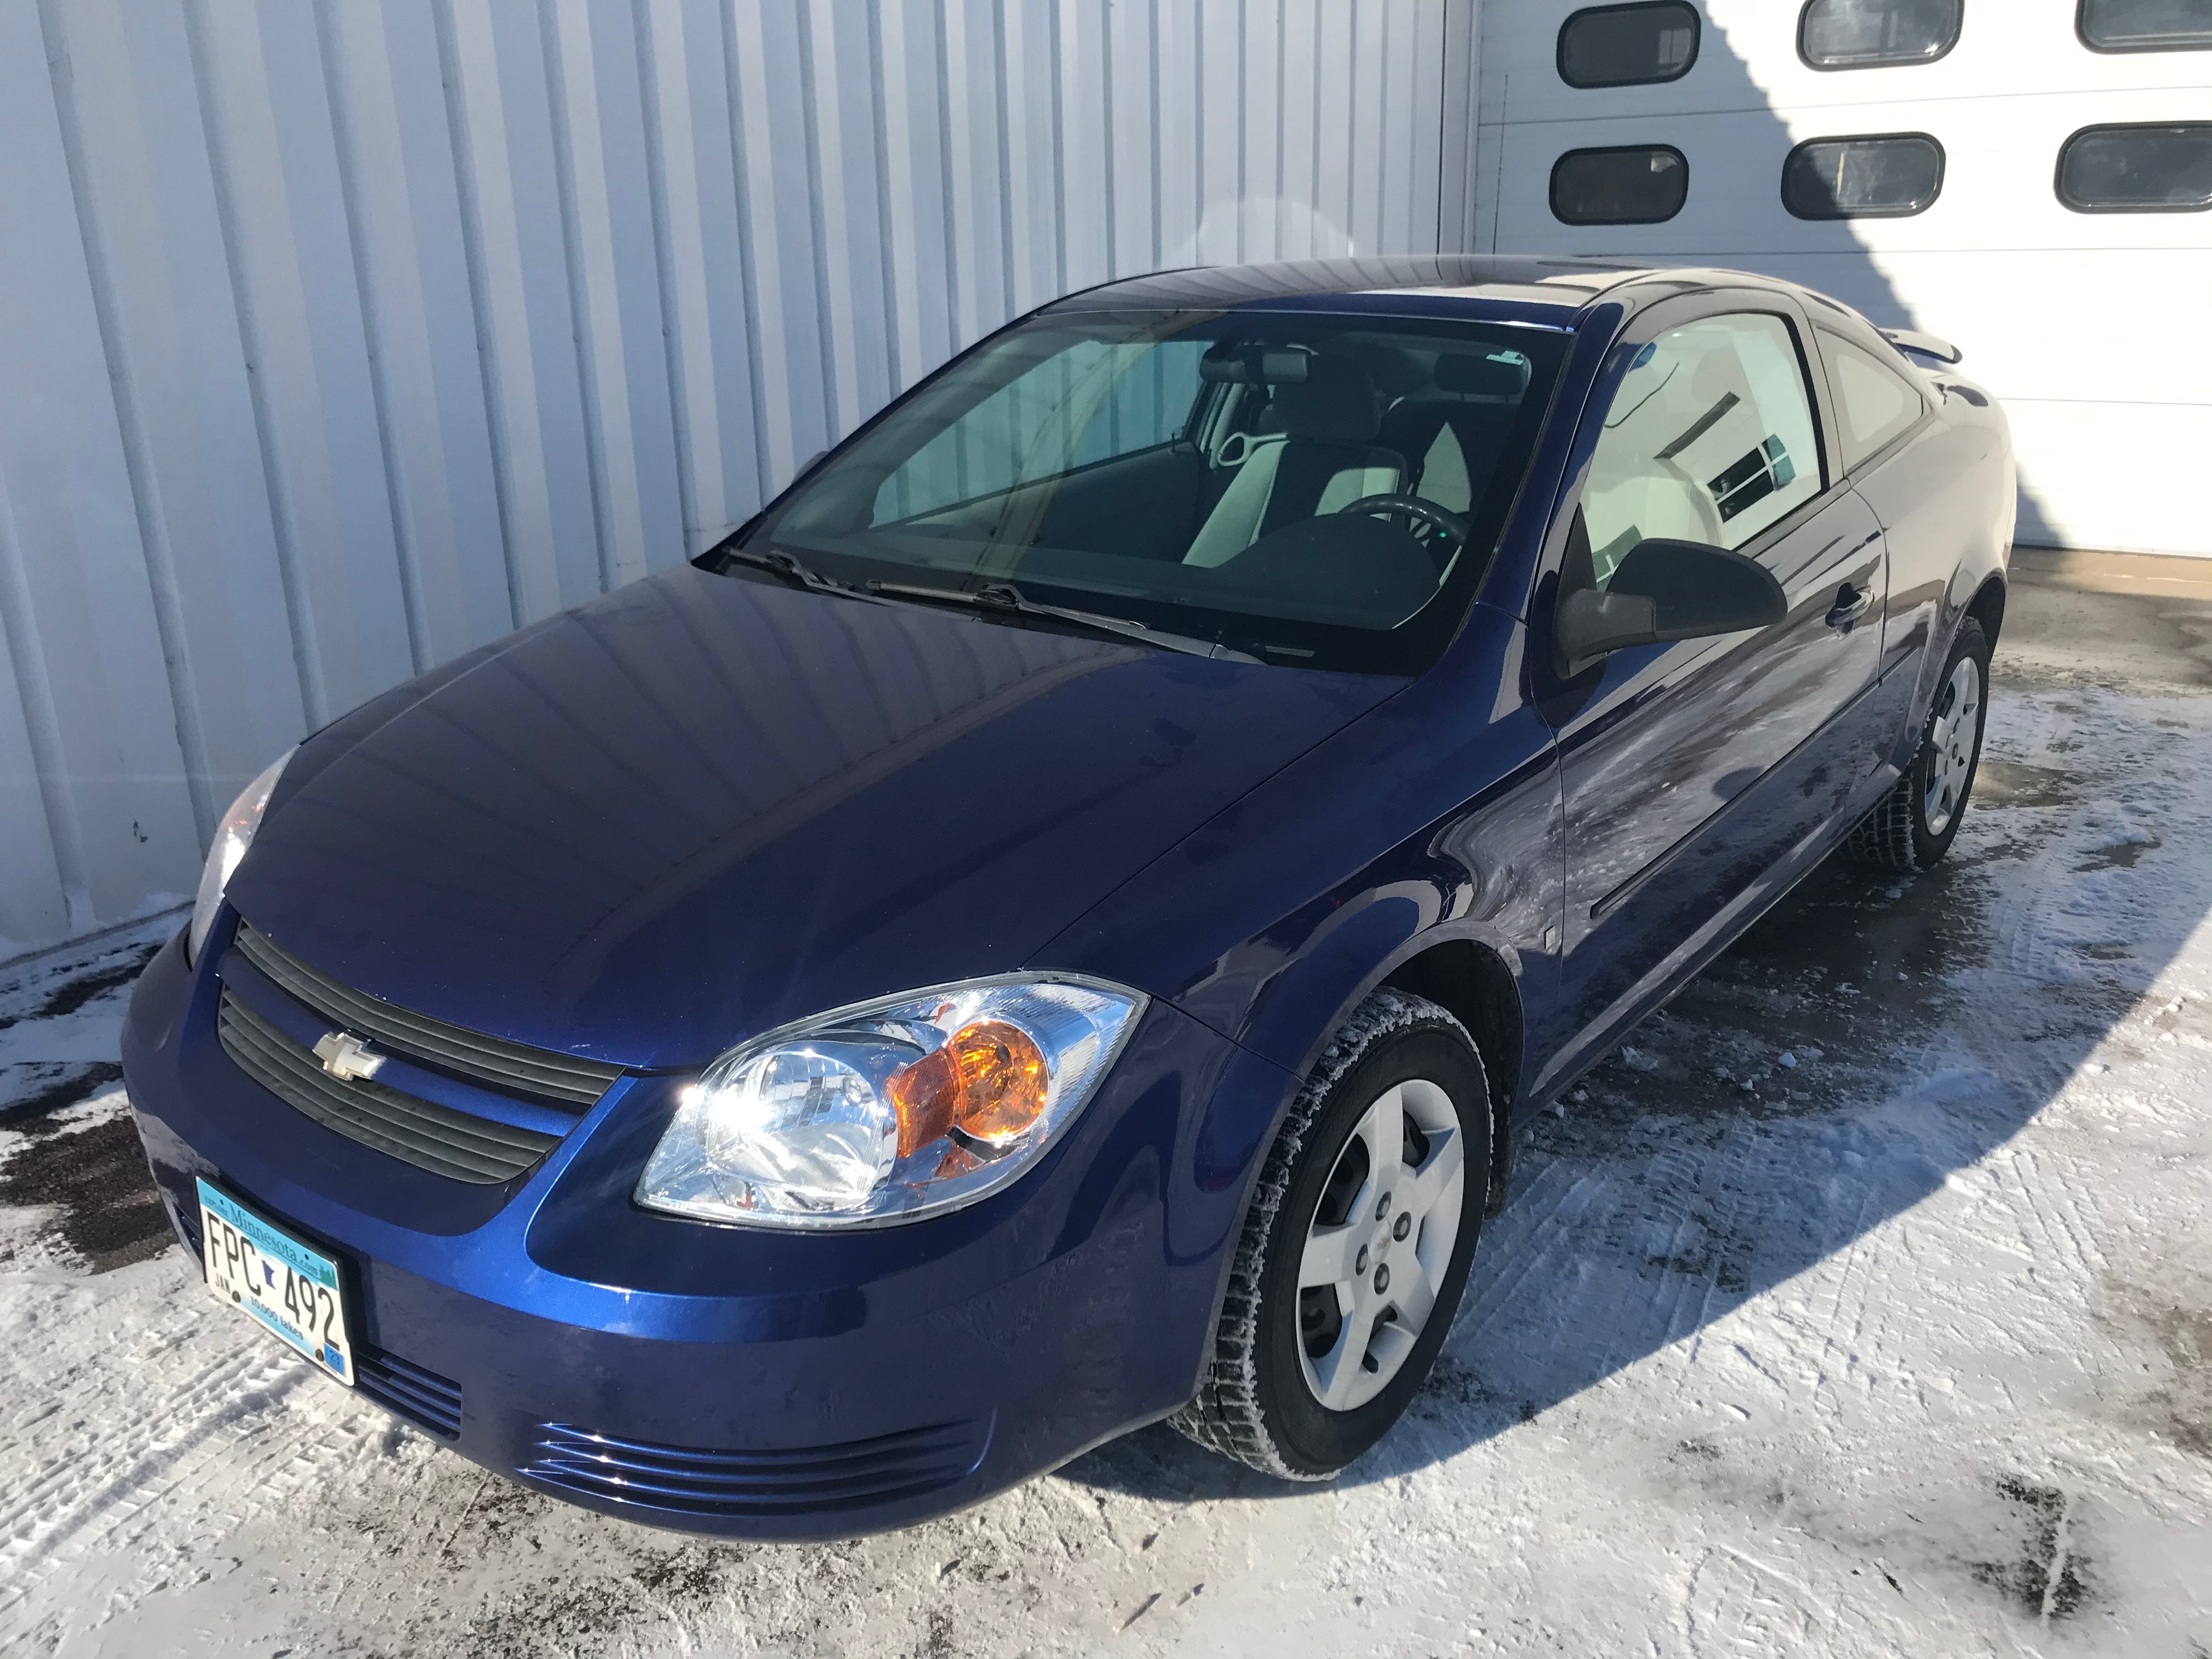 Used 2007 Chevrolet Cobalt LS with VIN 1G1AK15F177377657 for sale in Arlington, Minnesota